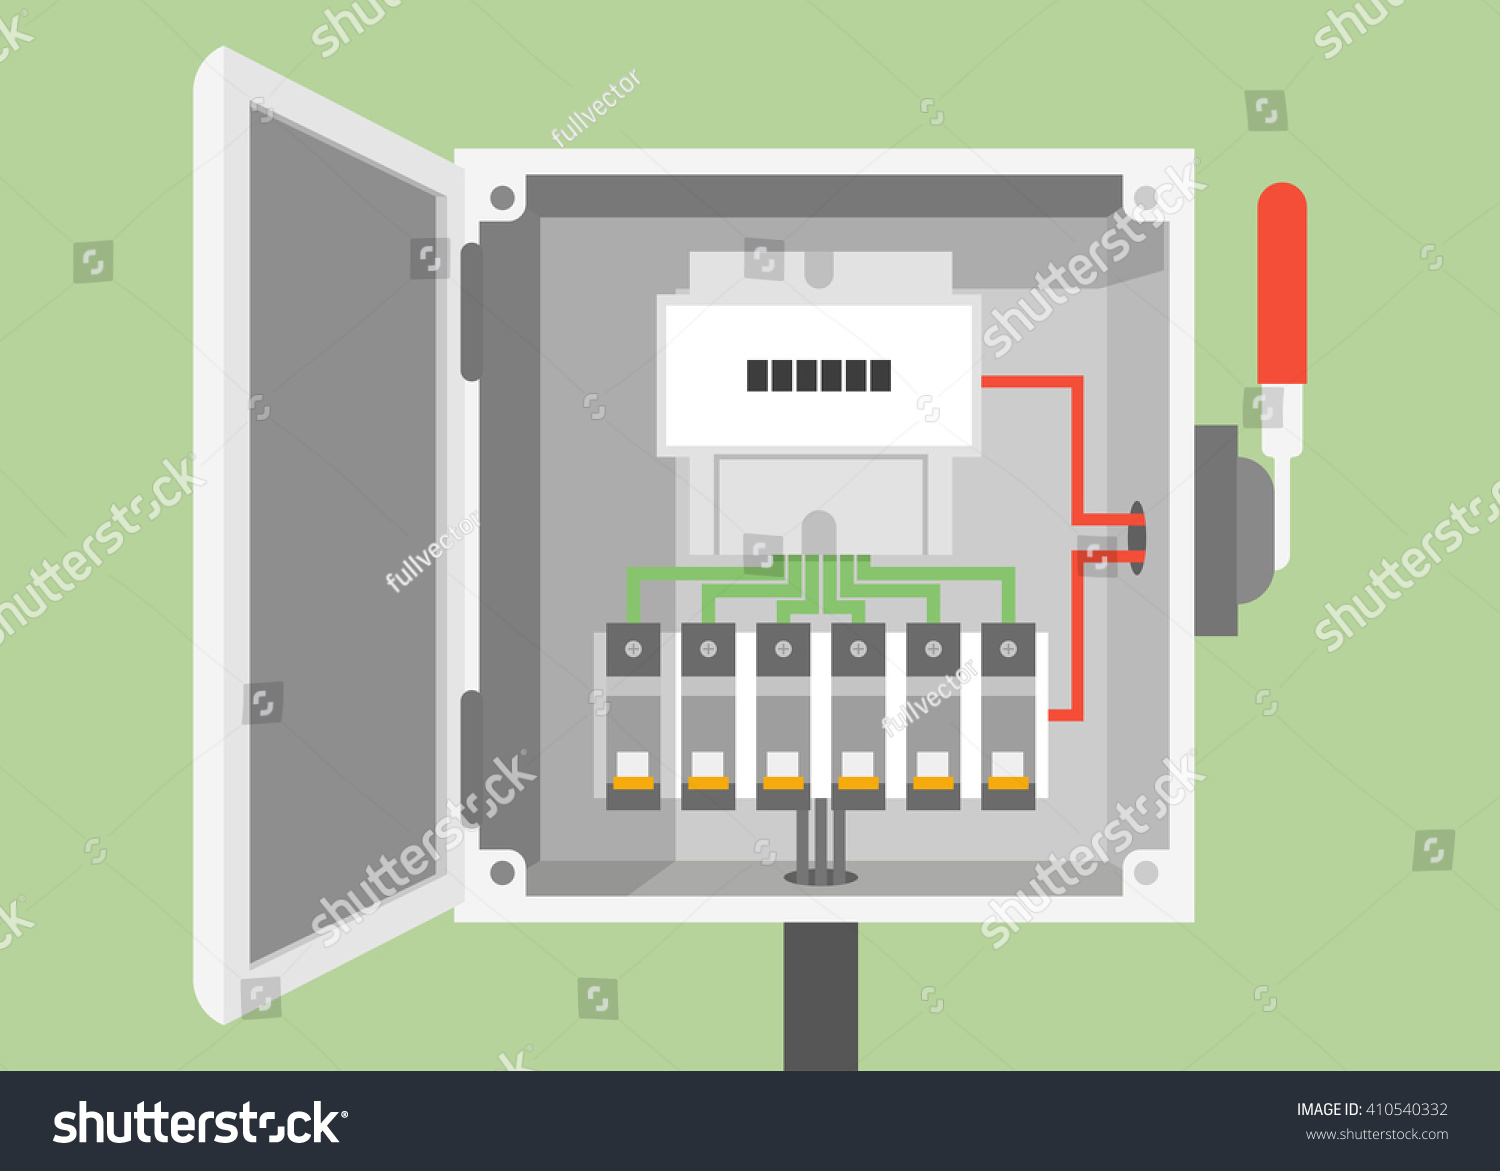 SVG of Breakers switch vector flat, fuse vector, electric box, circuit breakers, electrical panel, switch with wires, electric meter in box svg